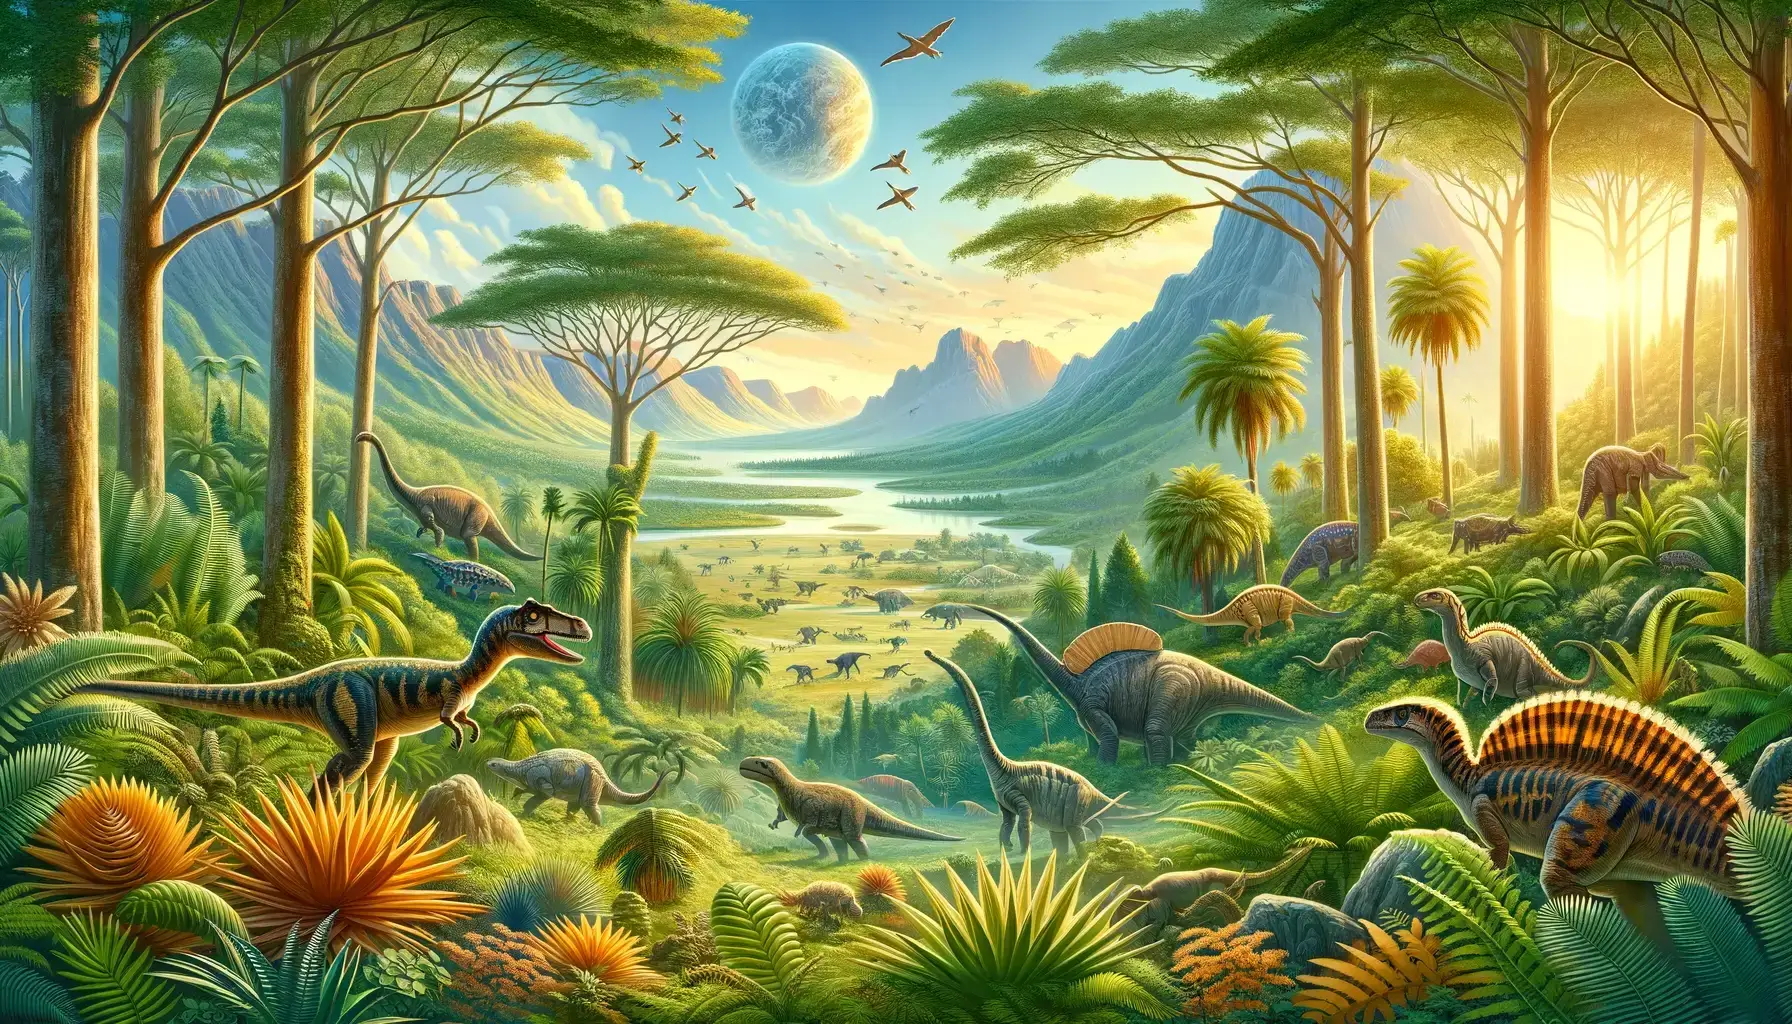 A captivating illustration depicting various early dinosaur species thriving within their natural Triassic period habitat.